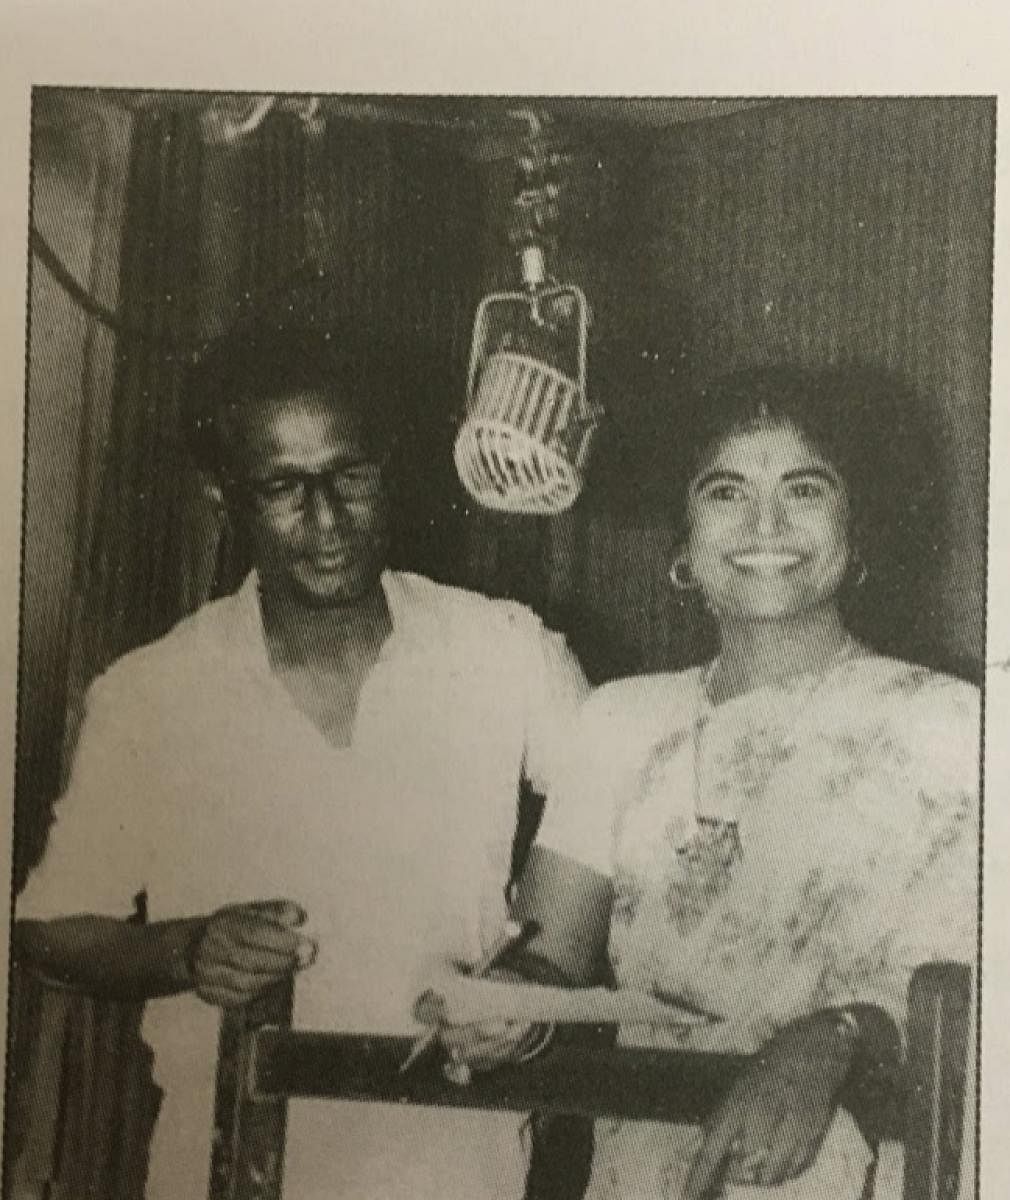 Music director R Rathna and singer LR Eswari in a recording session in the 1970s.